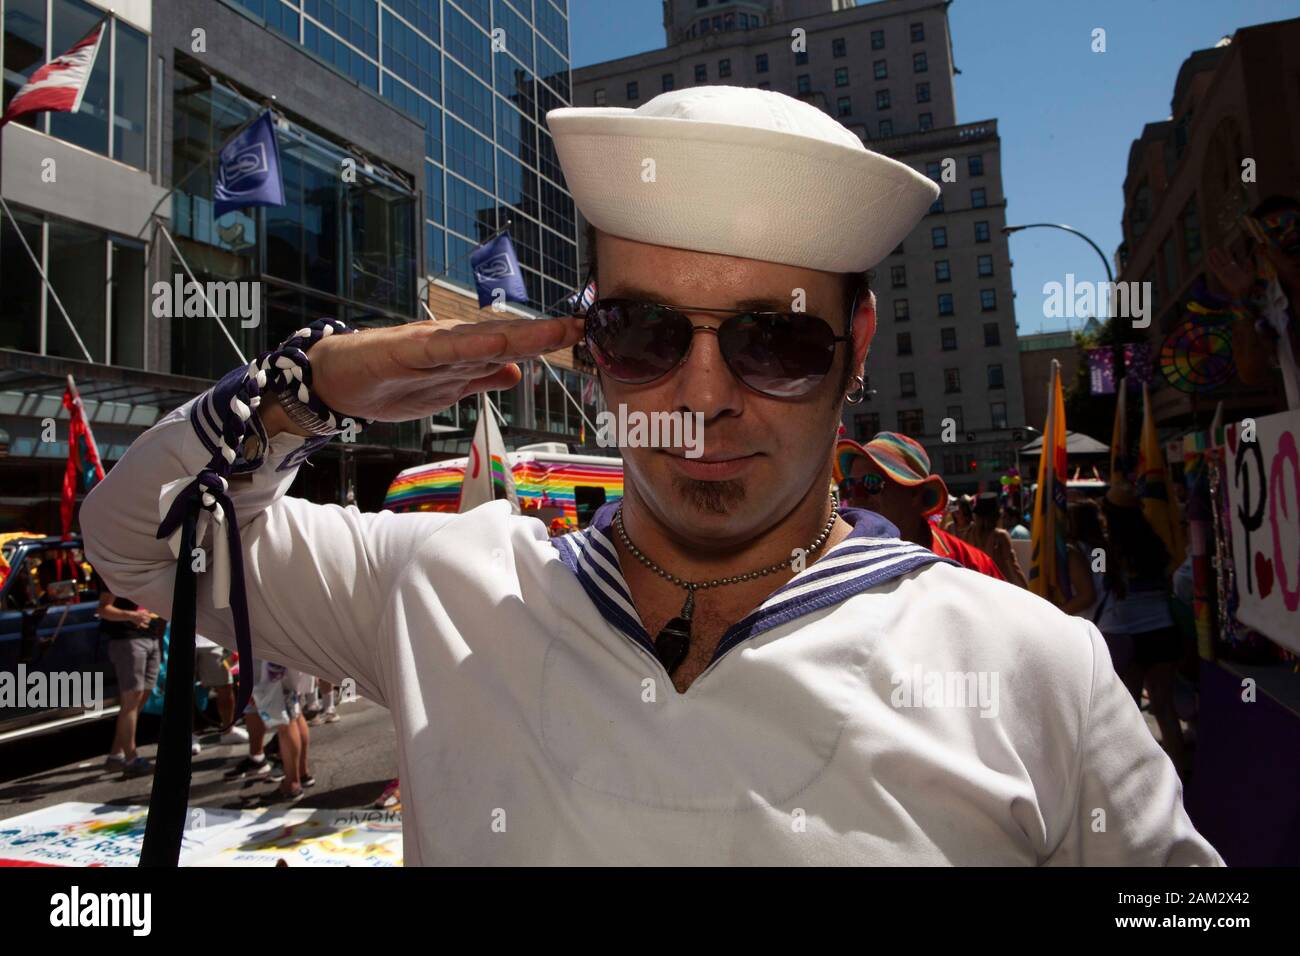 Pride parade participant in sailor costume saluting in street, crowd in background, Vancouver Pride Festival 2014, Vancouver, Canada Stock Photo